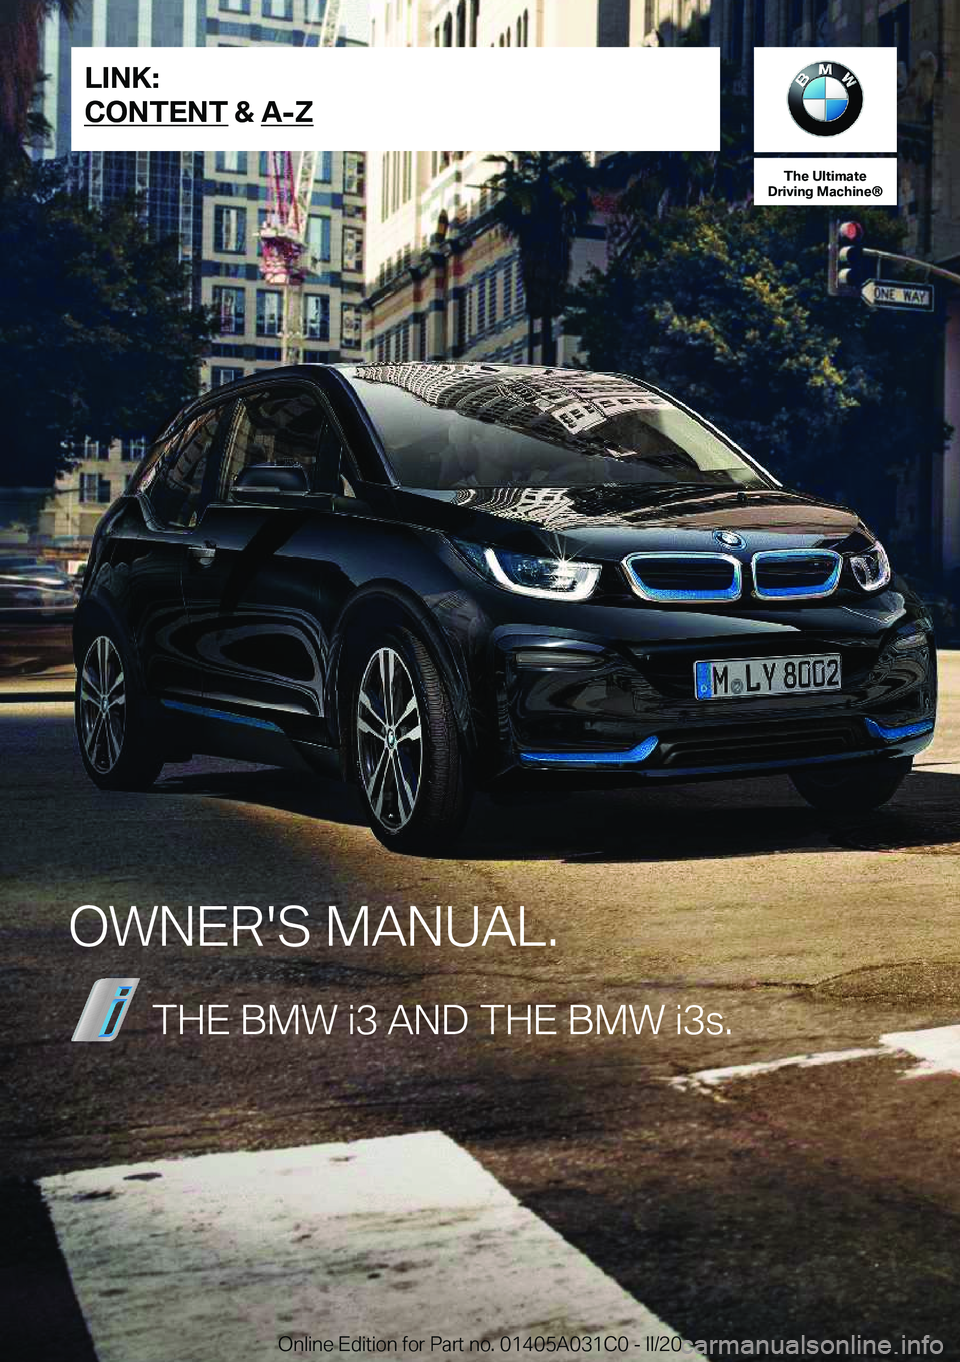 BMW I3 2020  Owners Manual �T�h�e��U�l�U�i�m�B�U�e
�D�S�i�W�i�n�g��M�B�c�h�i�n�e�n
�O�W�N�E�R�'�S��M�A�N�U�A�L�.�T�H�E��B�M�W��i�3��A�N�D��T�H�E��B�M�W��i�3�s�.�L�I�N�K�:
�C�O�N�T�E�N�T����A��;�O�n�l�i�n�e��E�